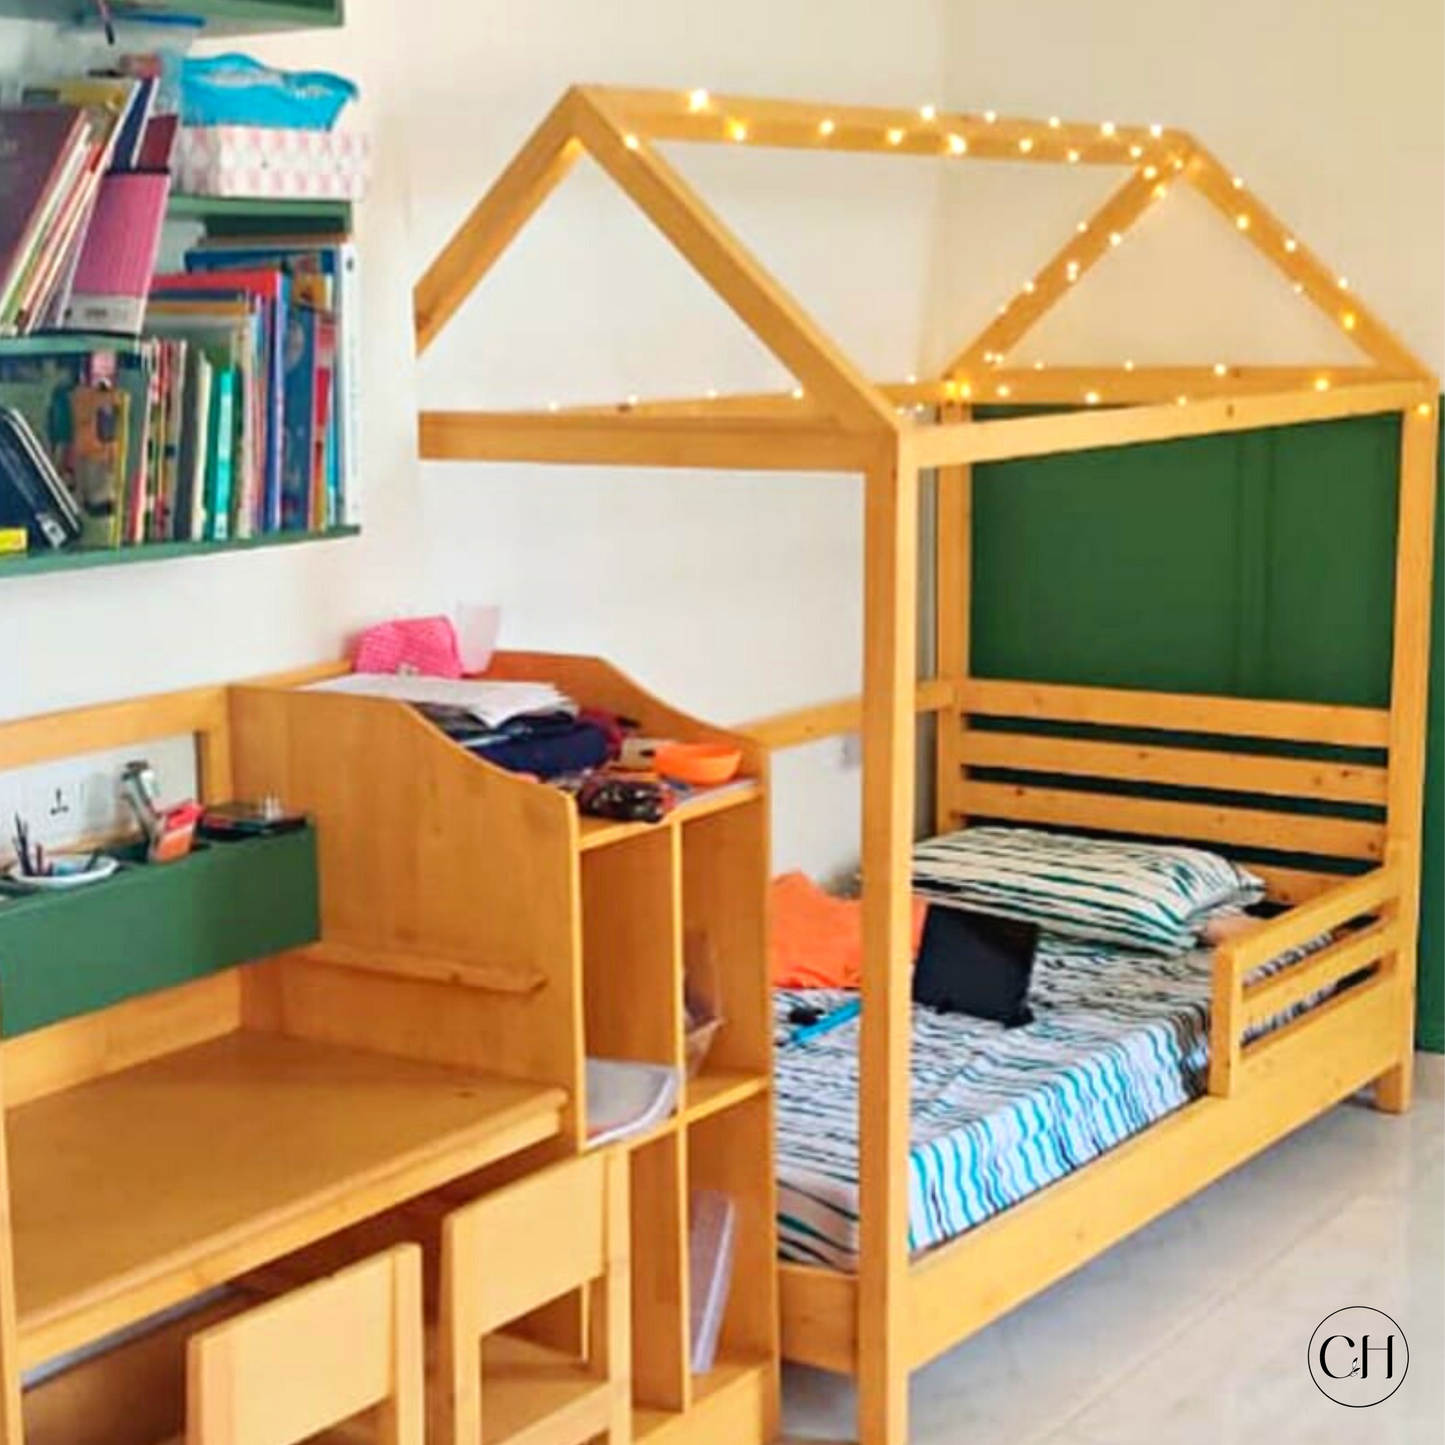 Adventure - House-shaped Bed for Kids - CustHum